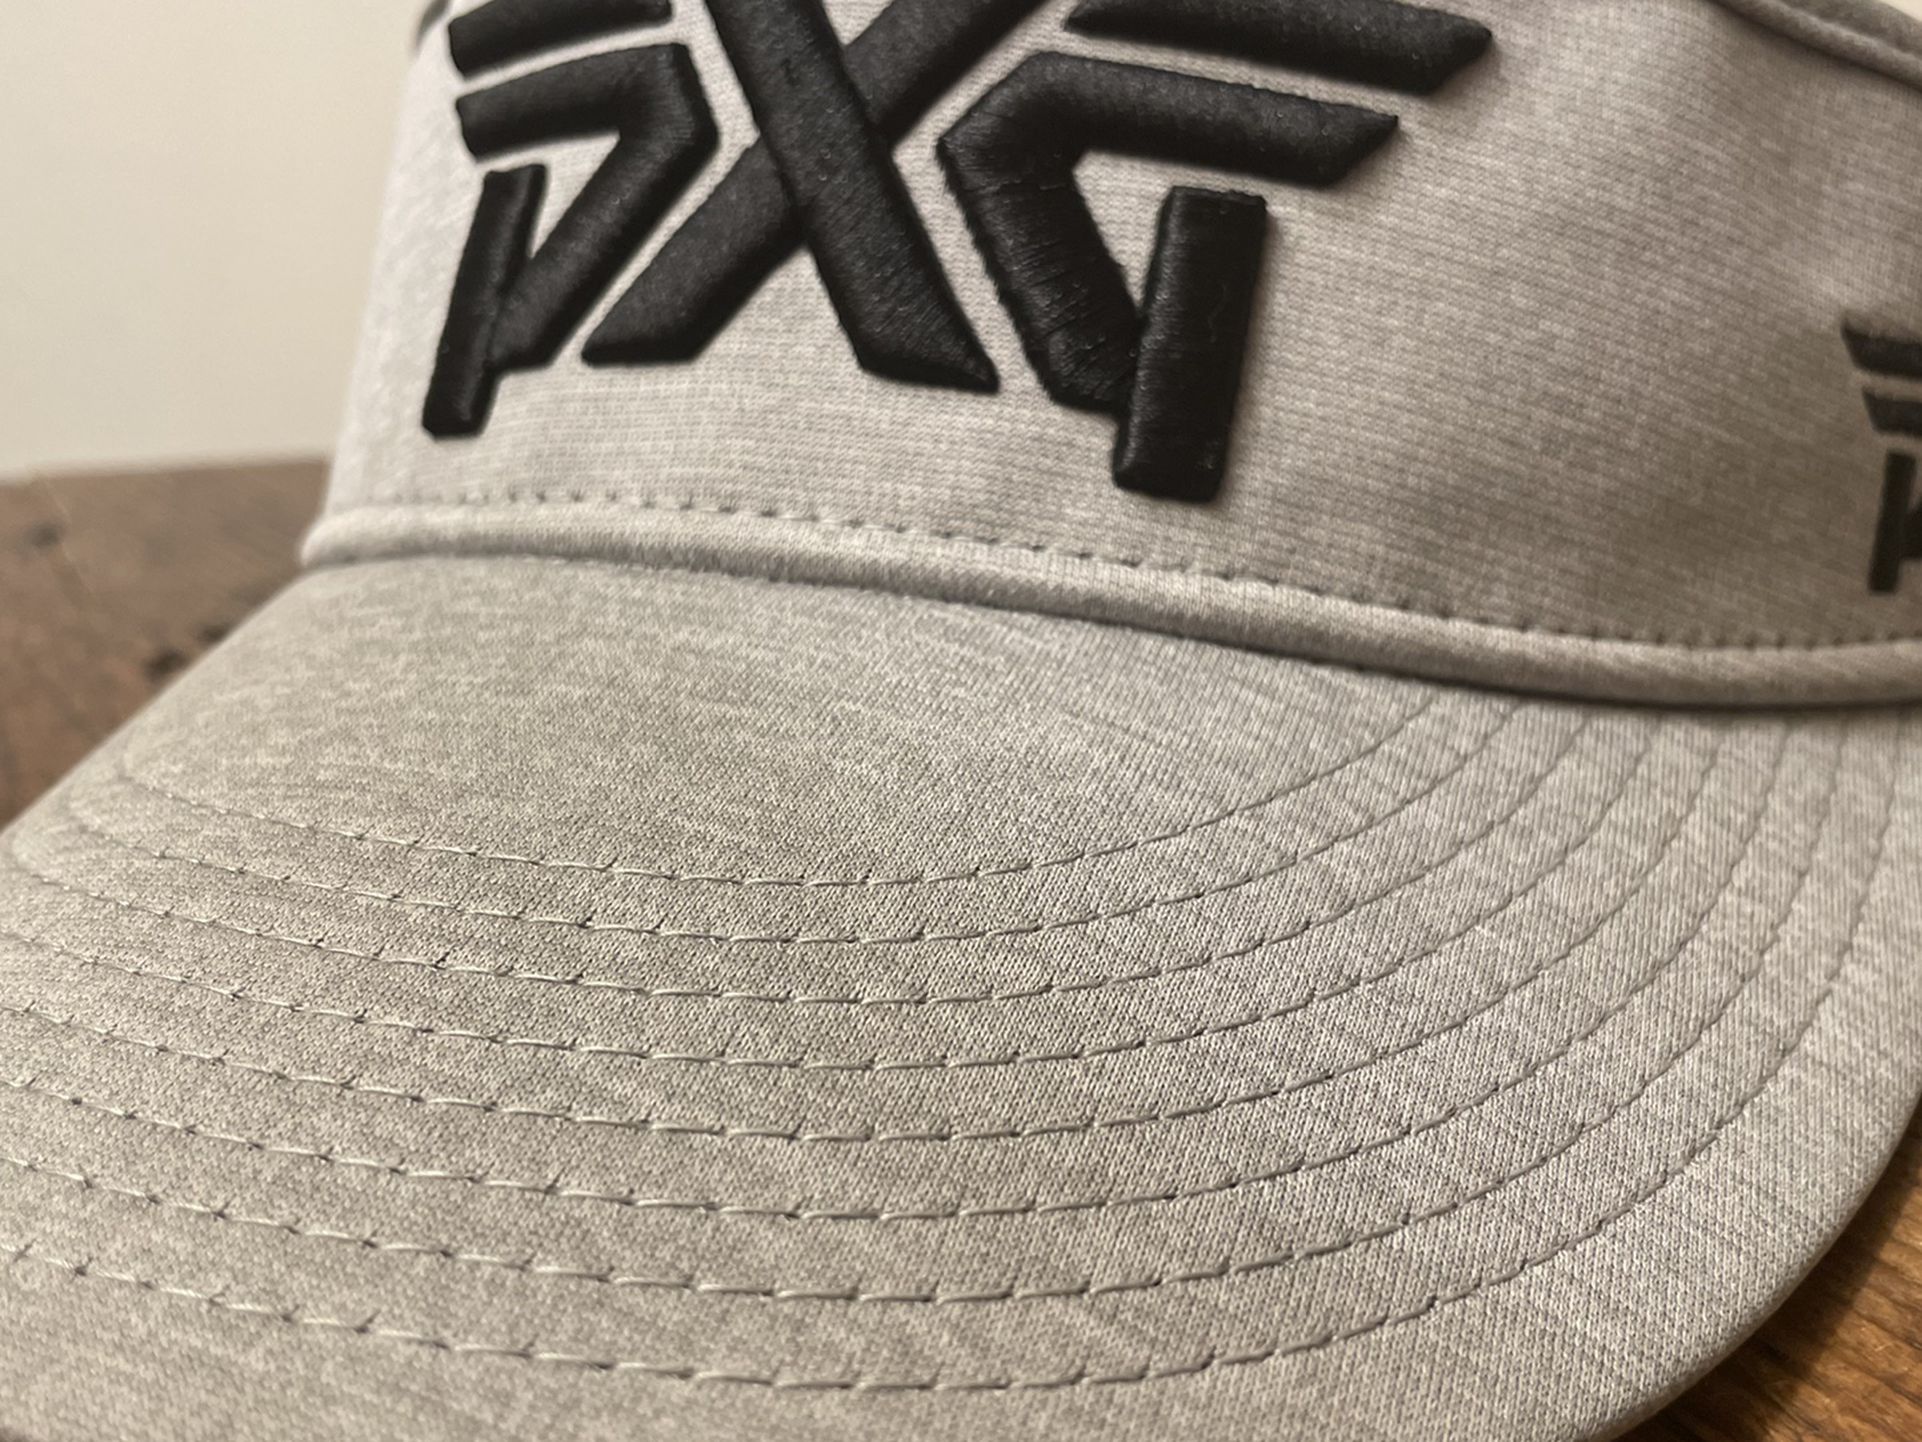 New Era PXG PERFORMANCE LINE TOUR VISOR- Grey Awesome Visor! Worn Once! It was only worn one time and is in terrific shape. Will sell fast! Ships out